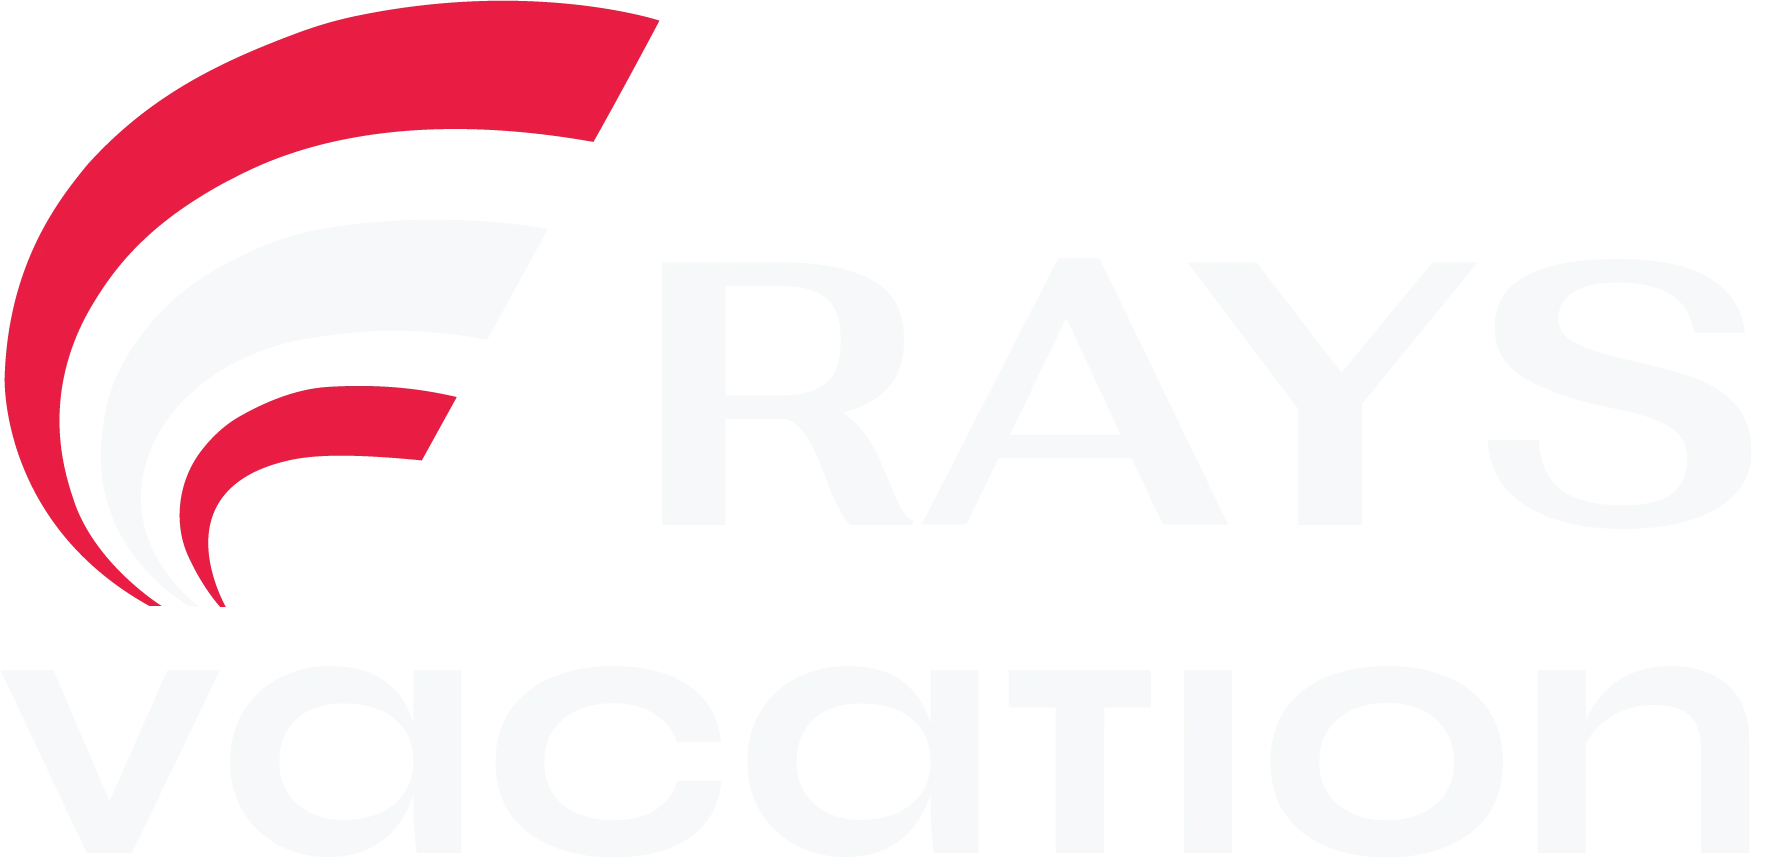 Rays Vacation | Terms of Service - Rays Vacation